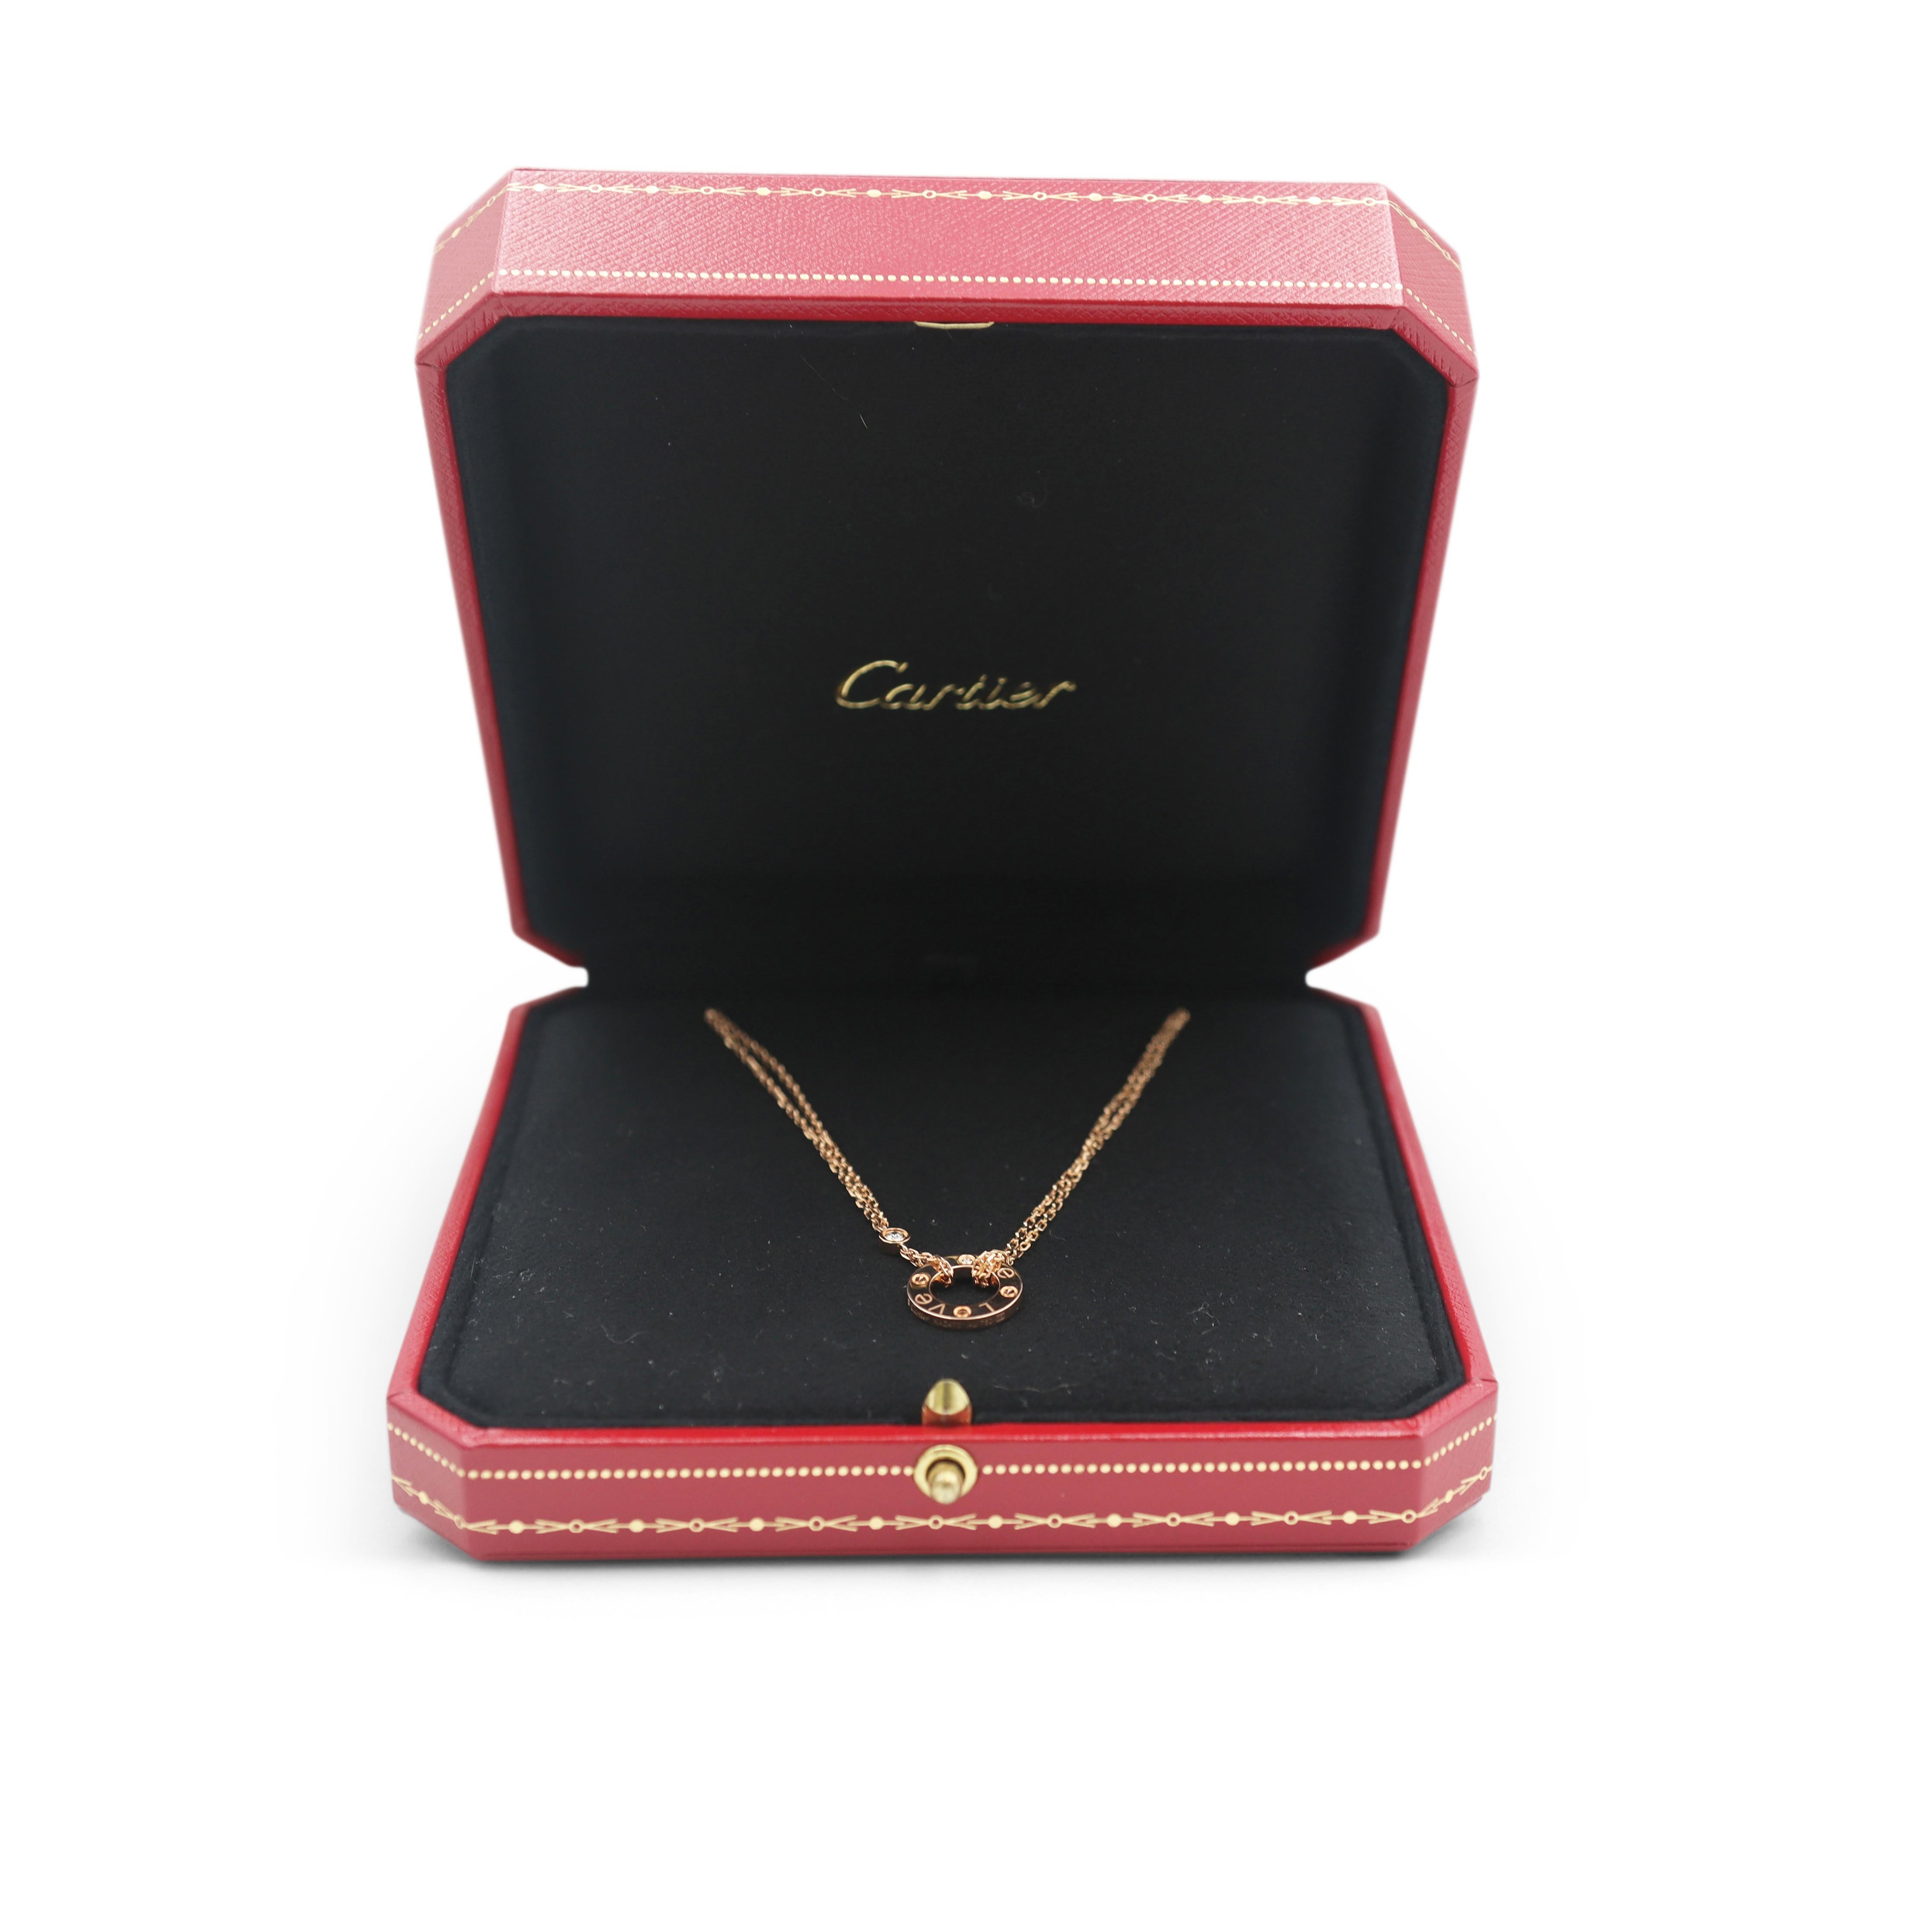 Cartier 'Love' Rose Gold and Diamond Circle Charm Necklace 1